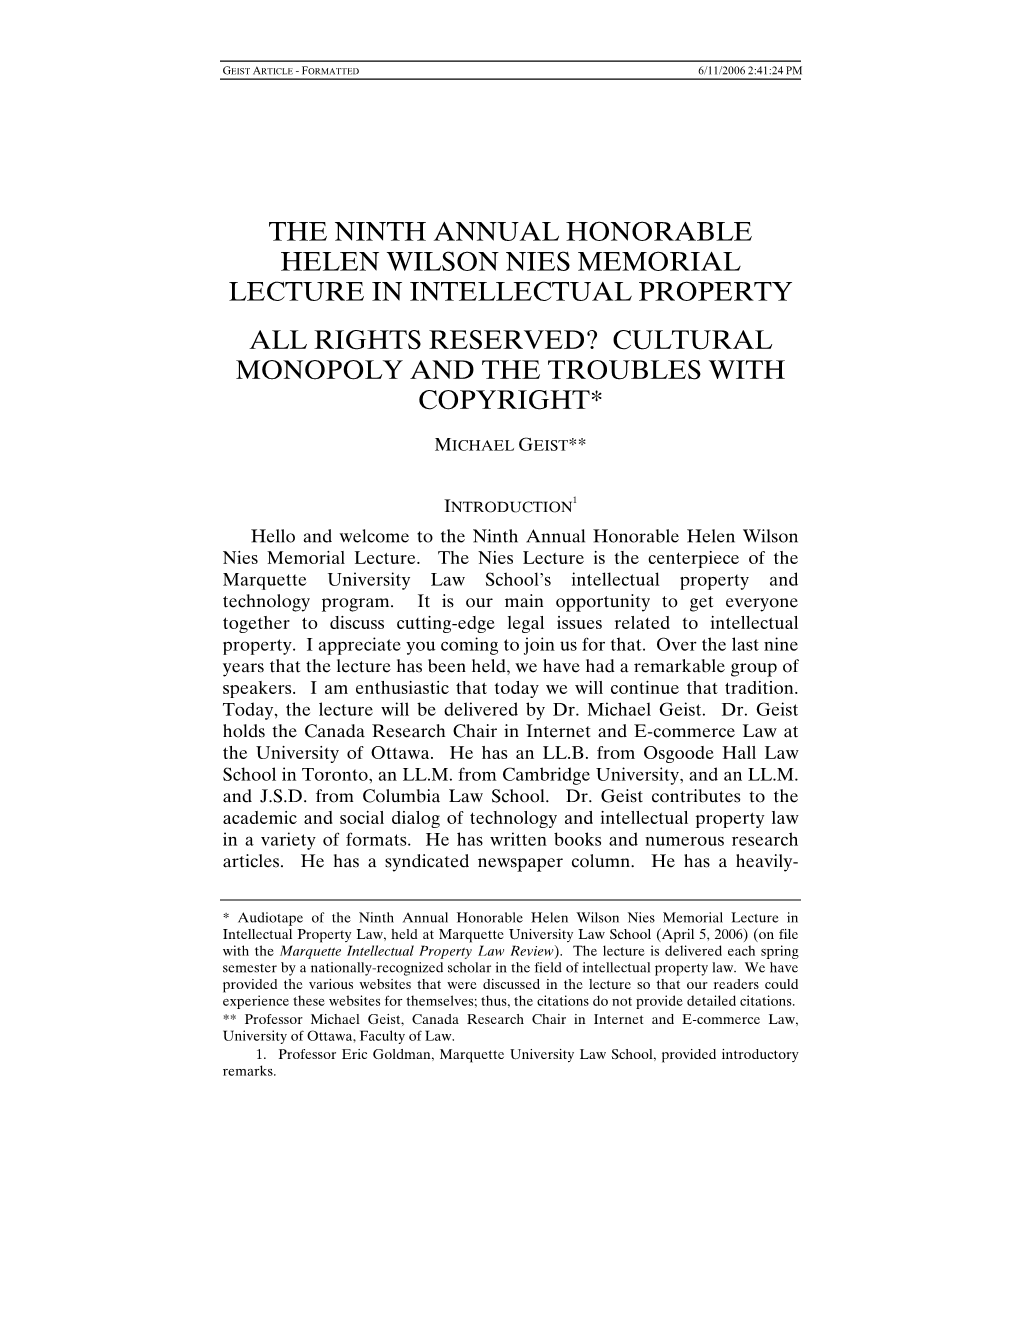 The Ninth Annual Honorable Helen Wilson Nies Memorial Lecture in Intellectual Property All Rights Reserved? Cultural Monopoly and the Troubles with Copyright*